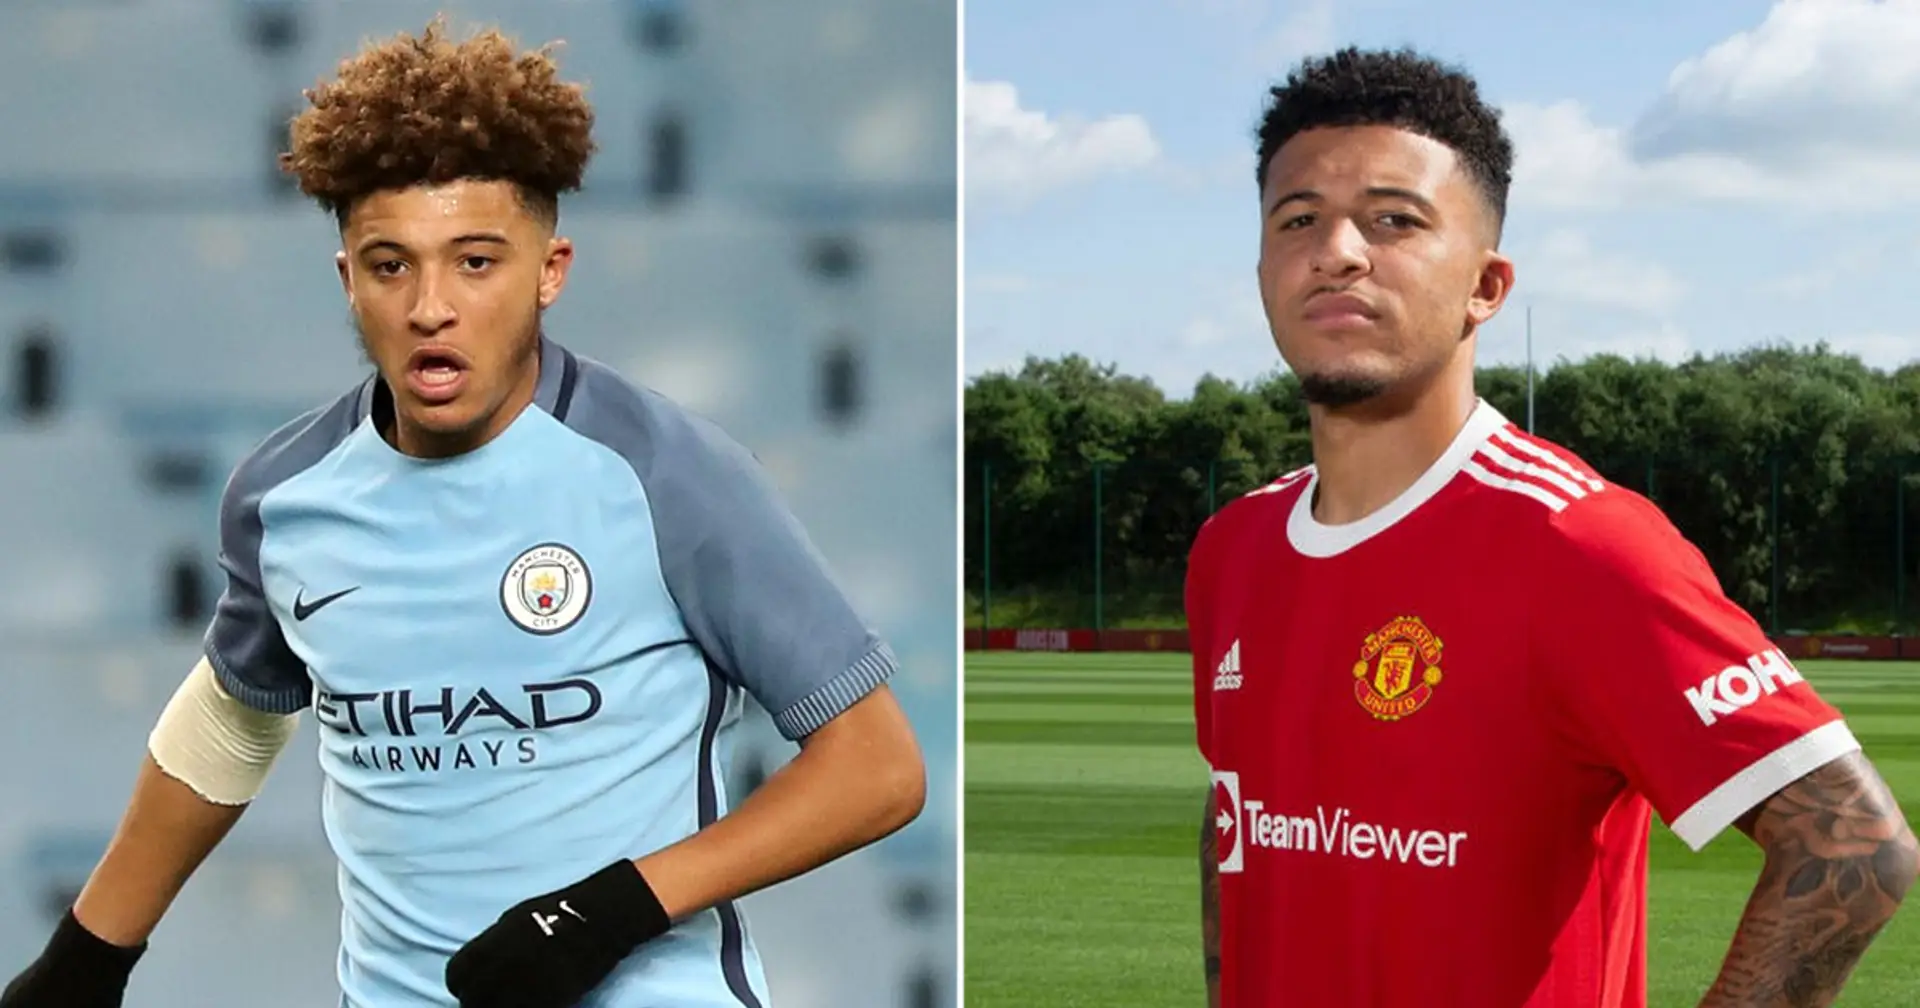 'Bring out a red Welcome to Manchester banner': United fans troll Man City after Jadon Sancho reveal